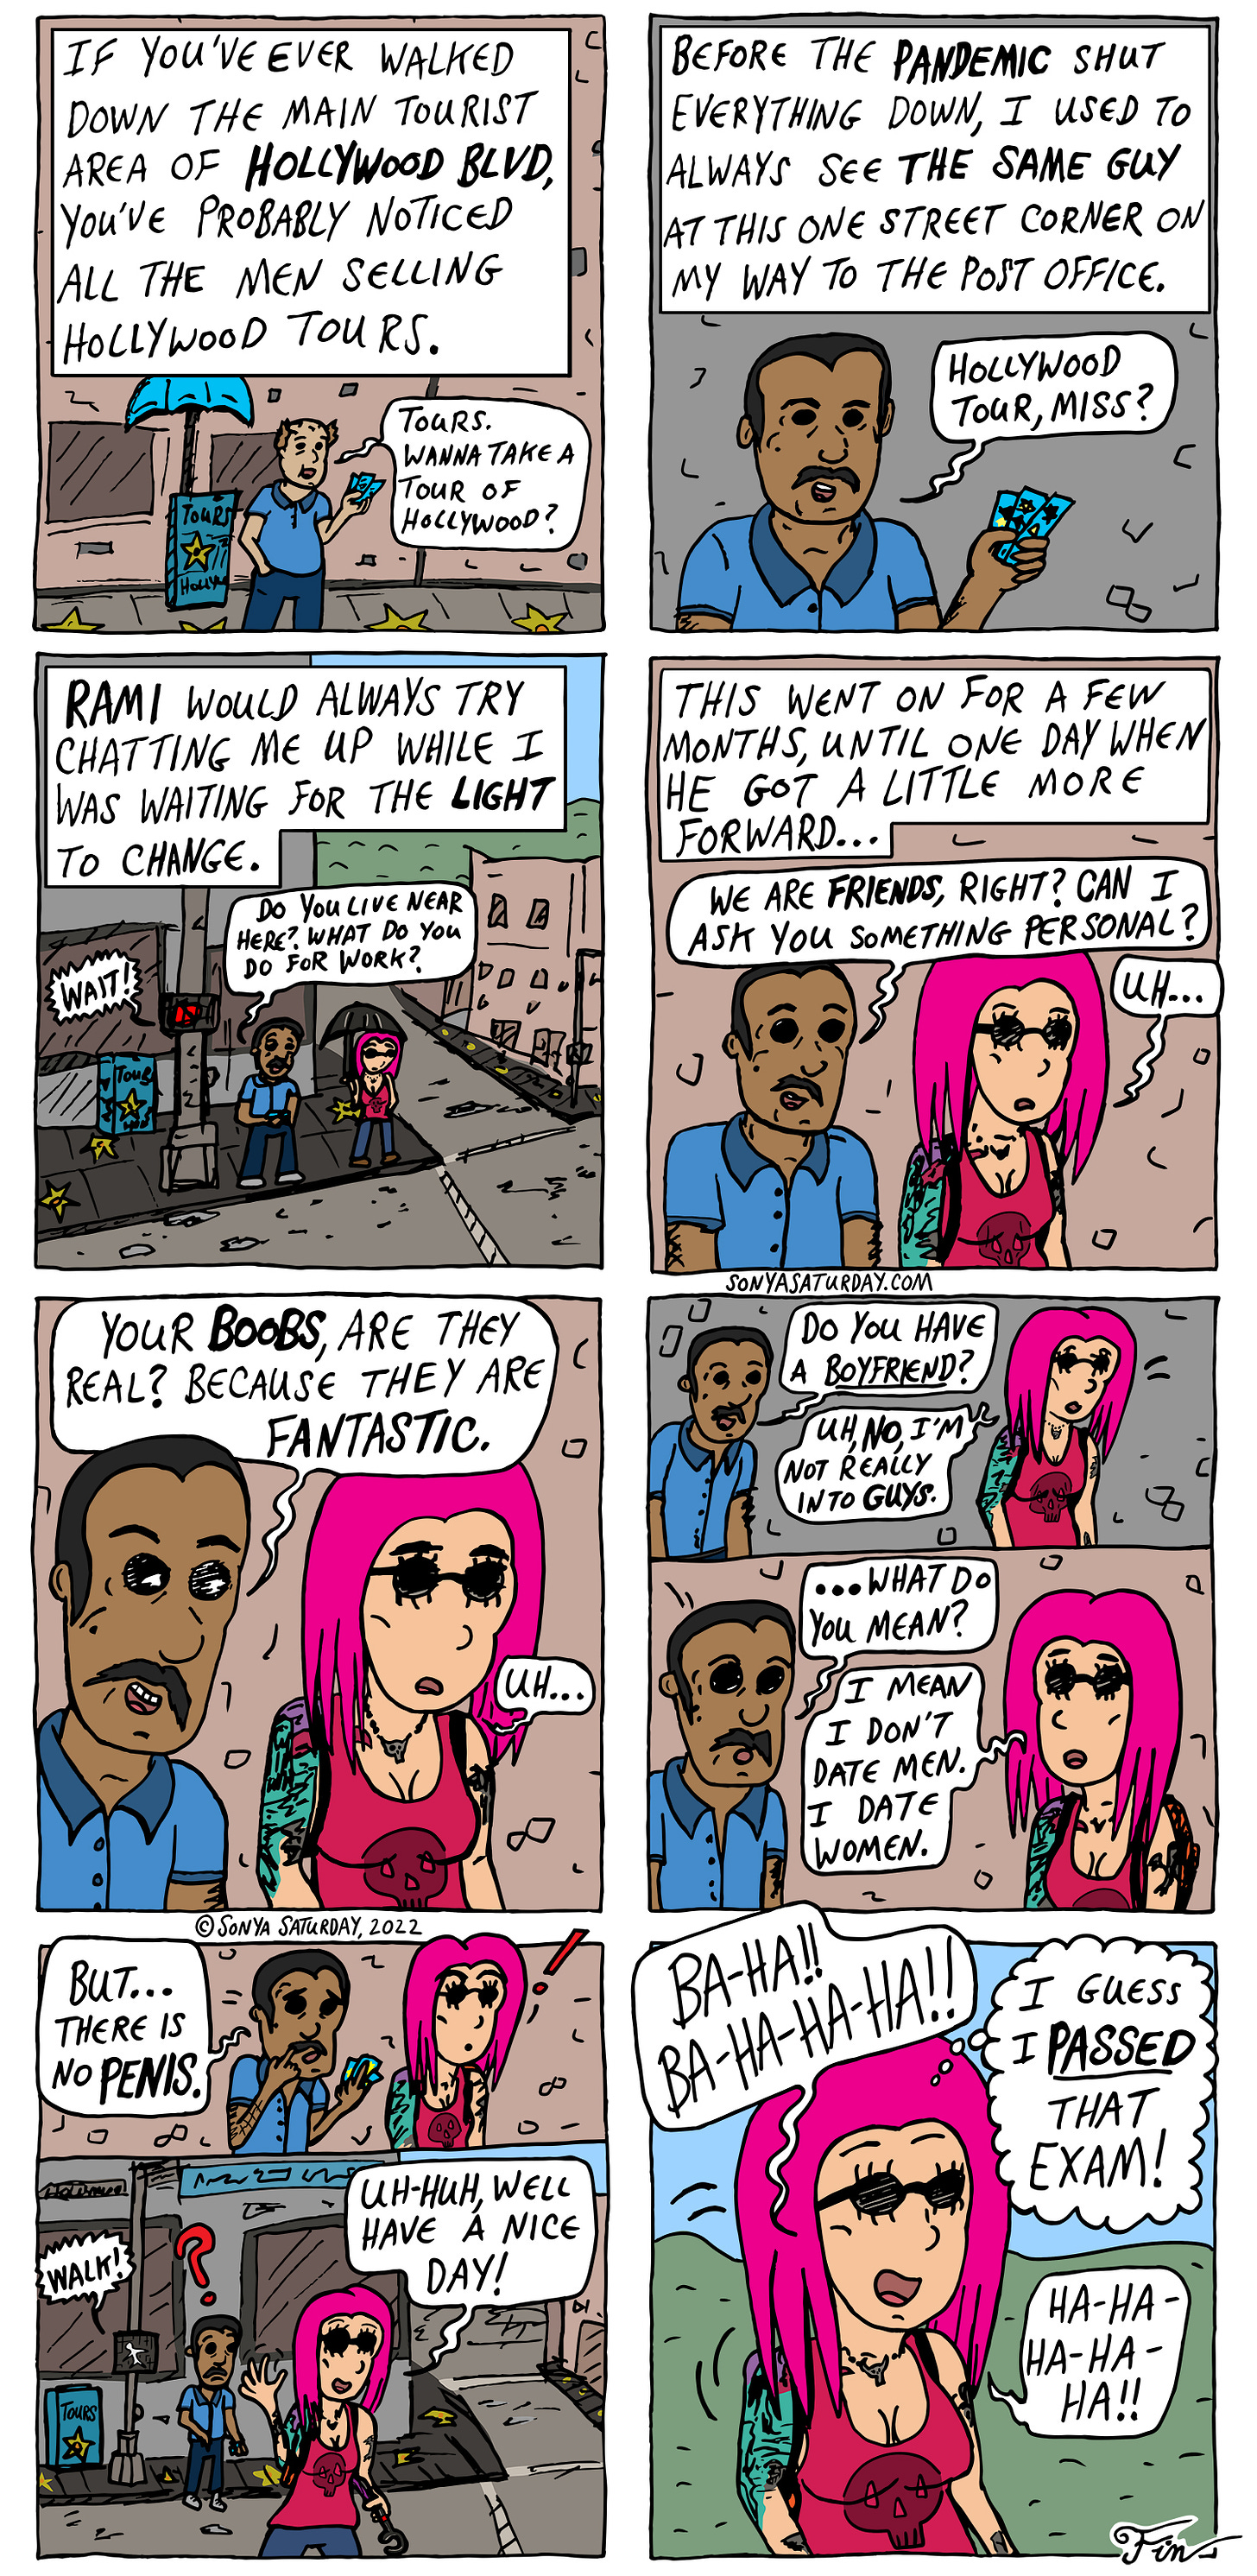 Comic strip about a guy selling tours of Hollywood, by Sonya Saturday